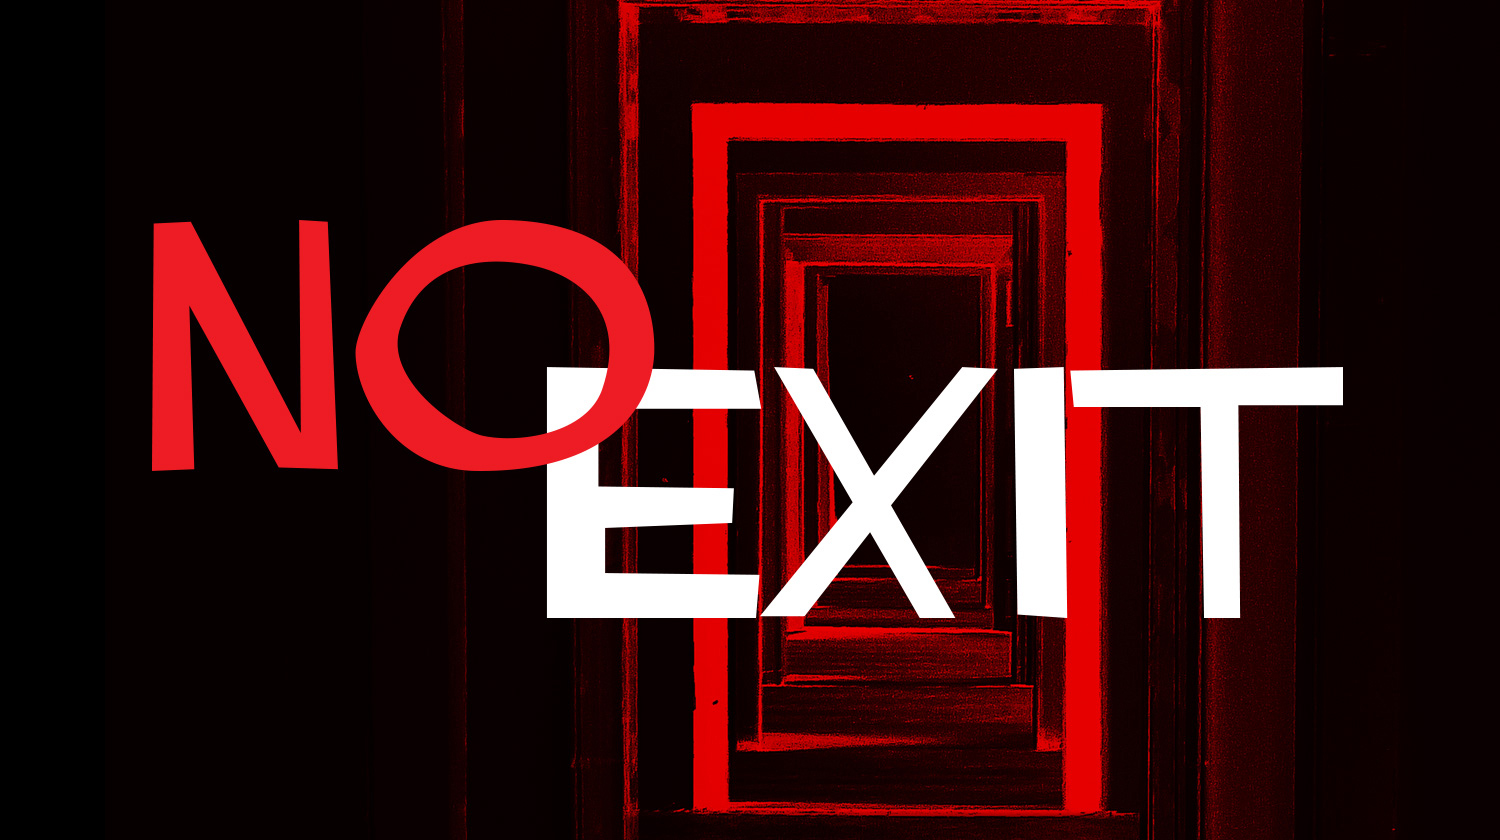 One Last Weekend to Take ‘No Exit’